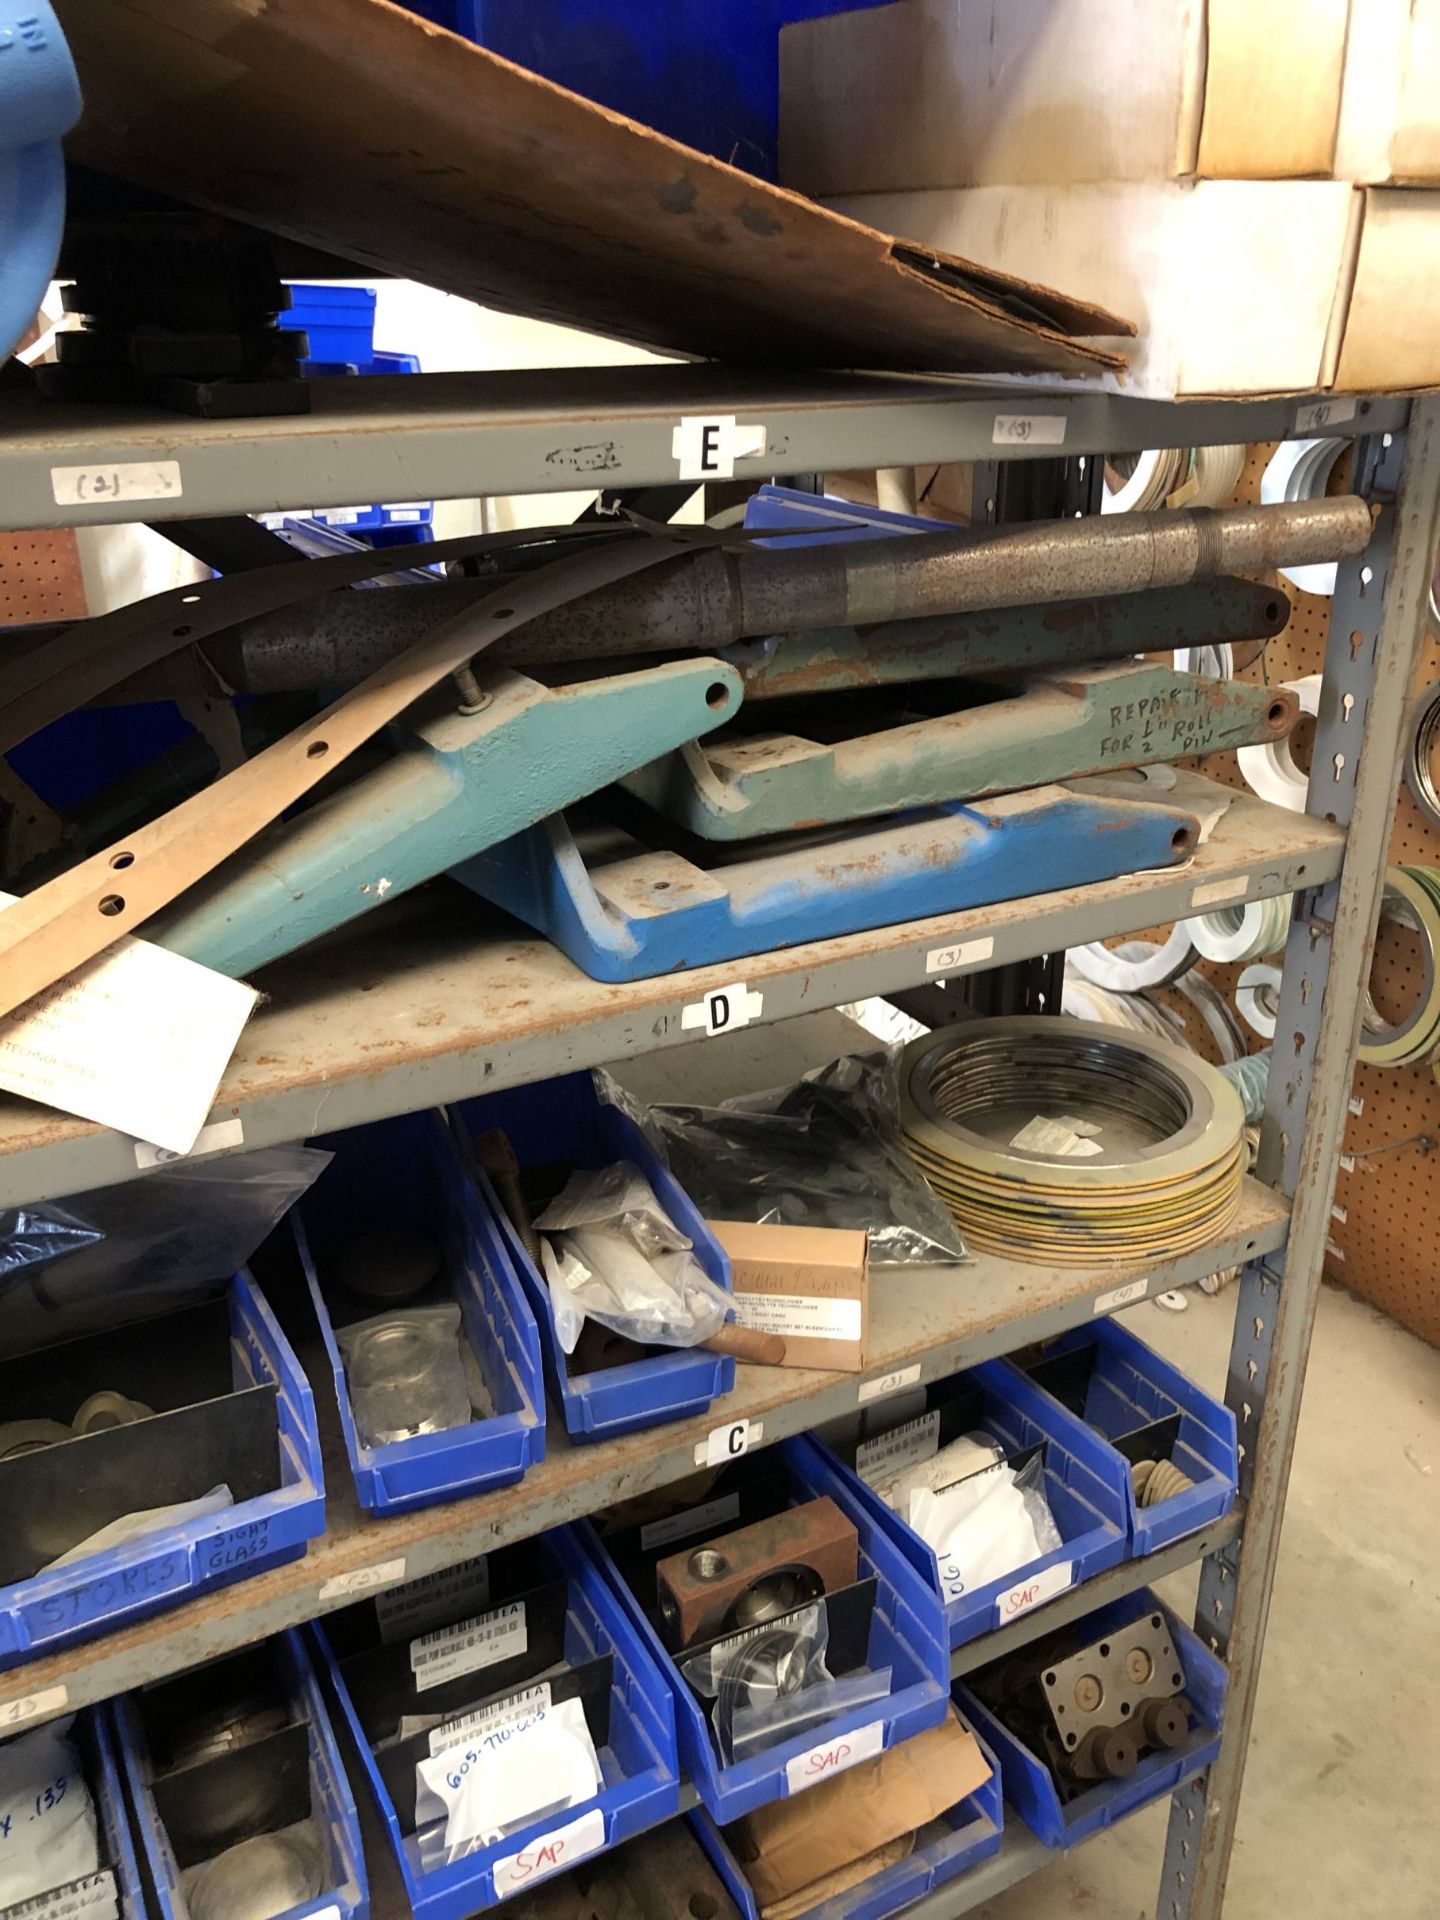 Maintenance Spares Lot: (6) Sections Of Light Duty Industrial Shelving and Contents - Image 2 of 15